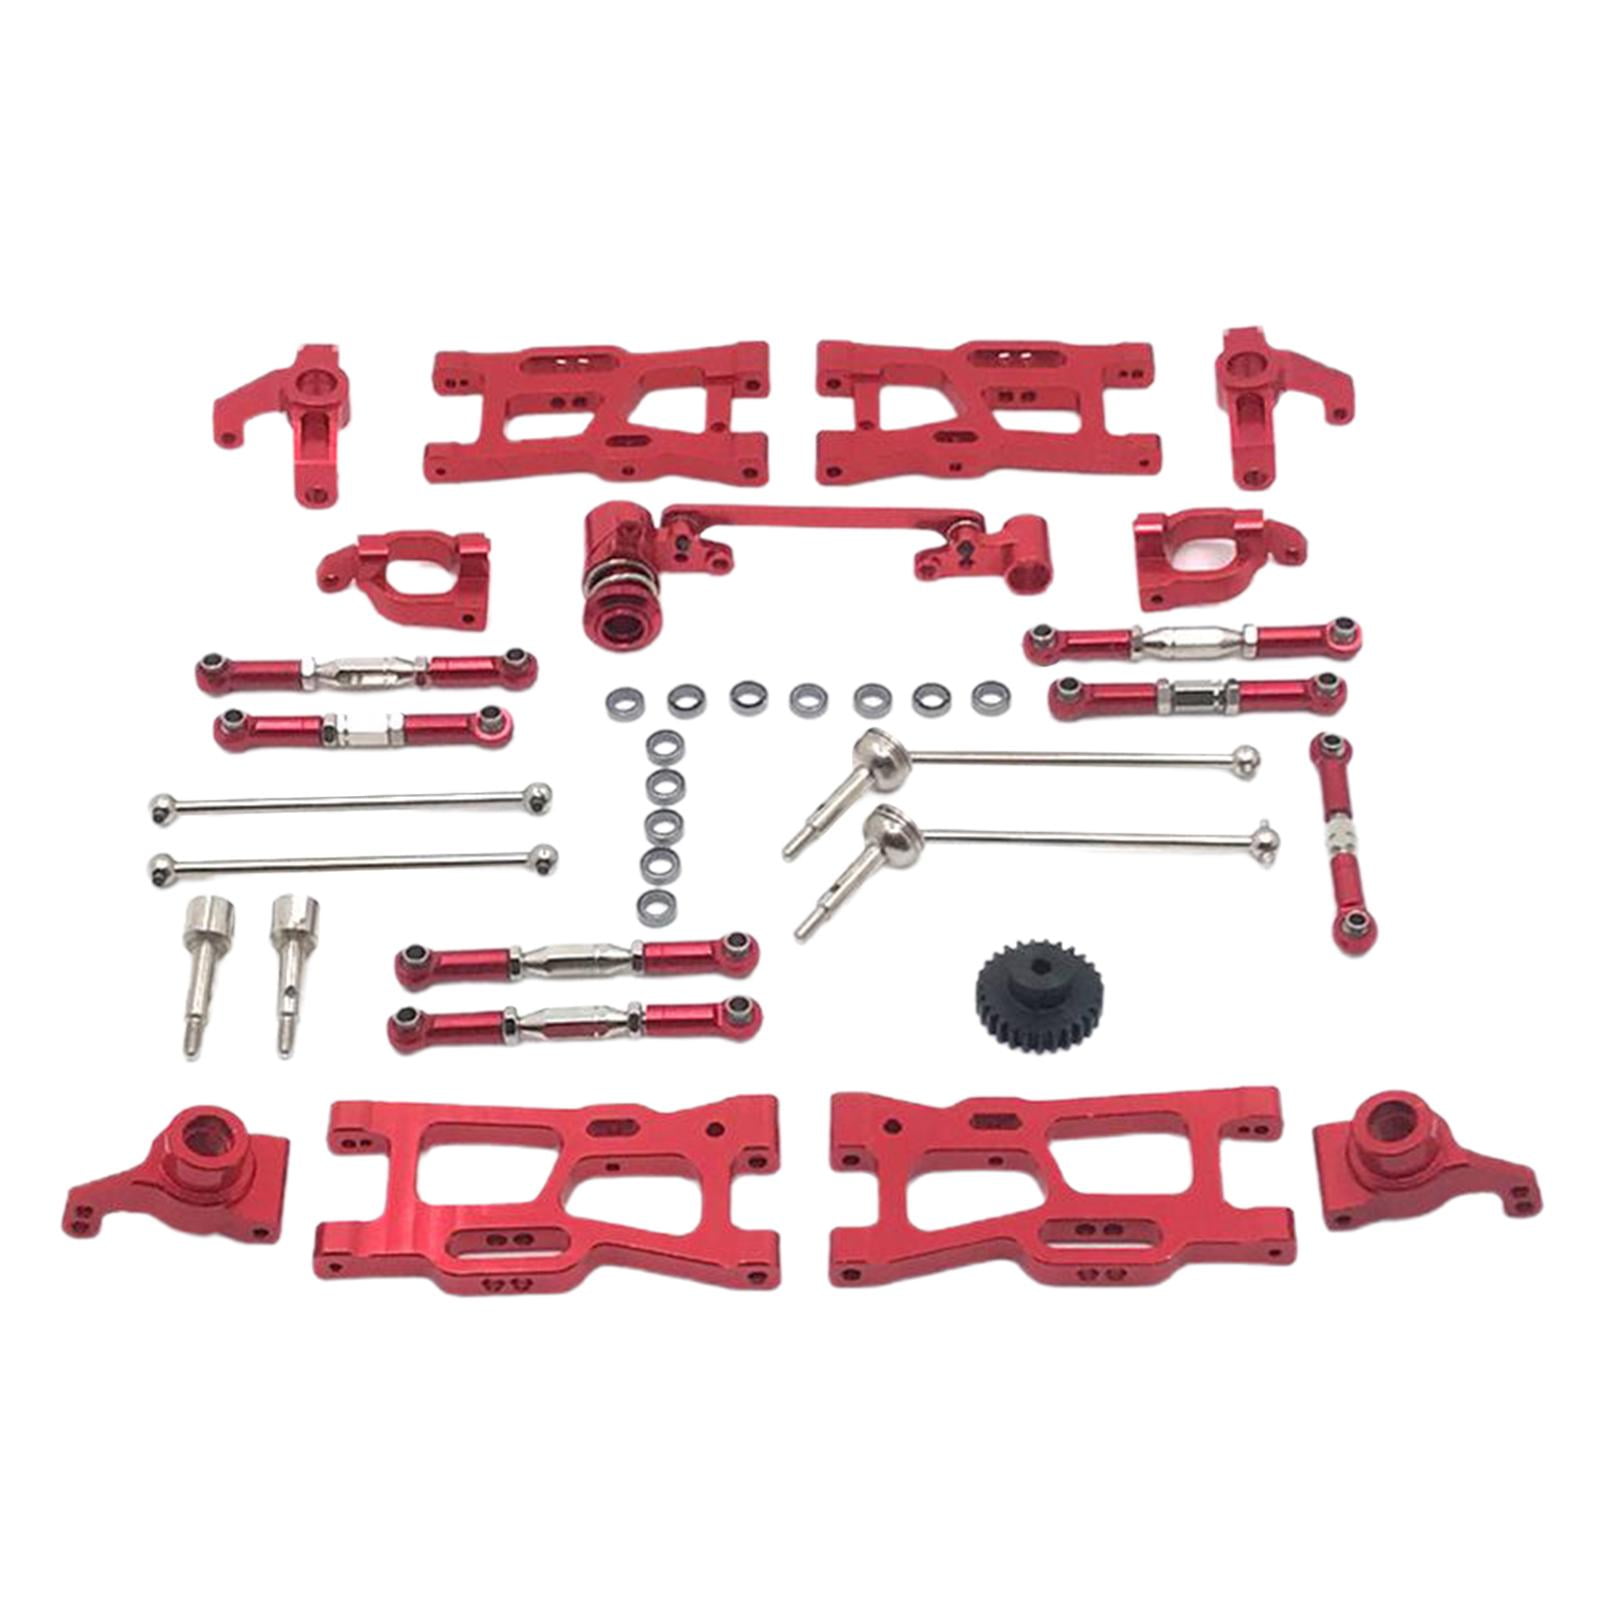 Upgrades Spare Parts Kit Fit for WLtoys 144001 124019 124018 RC Car Accs 